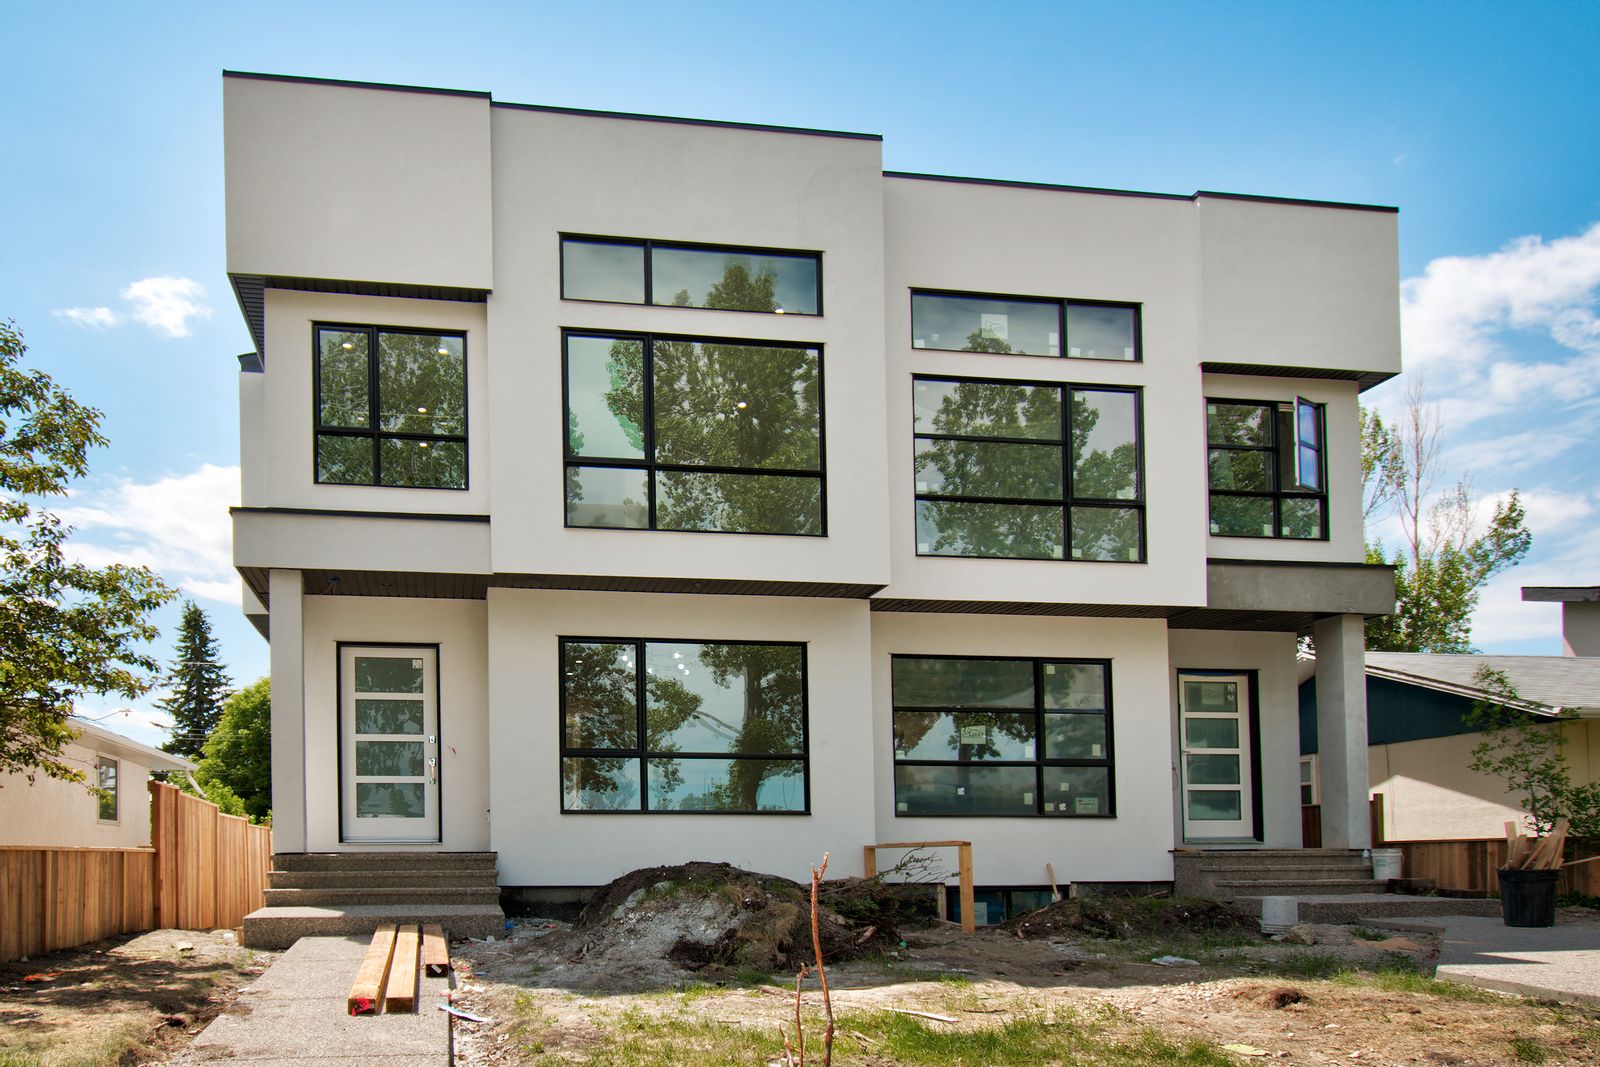 Building an Infill in Calgary